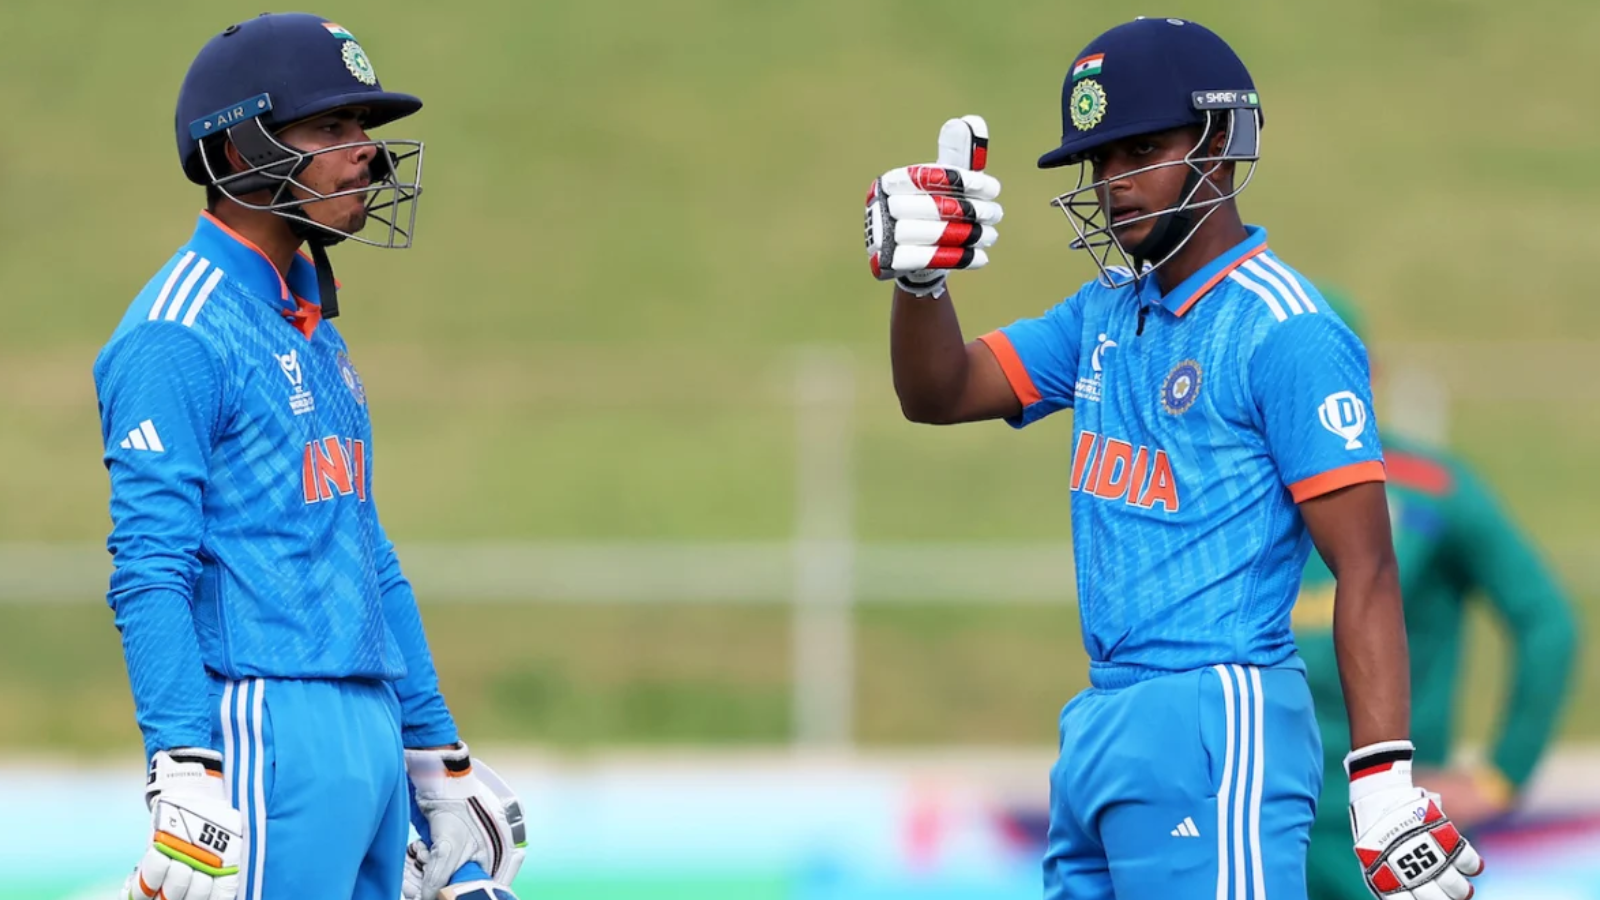 Uday Saharan And Sachin Dhas, Under 19 World Cup